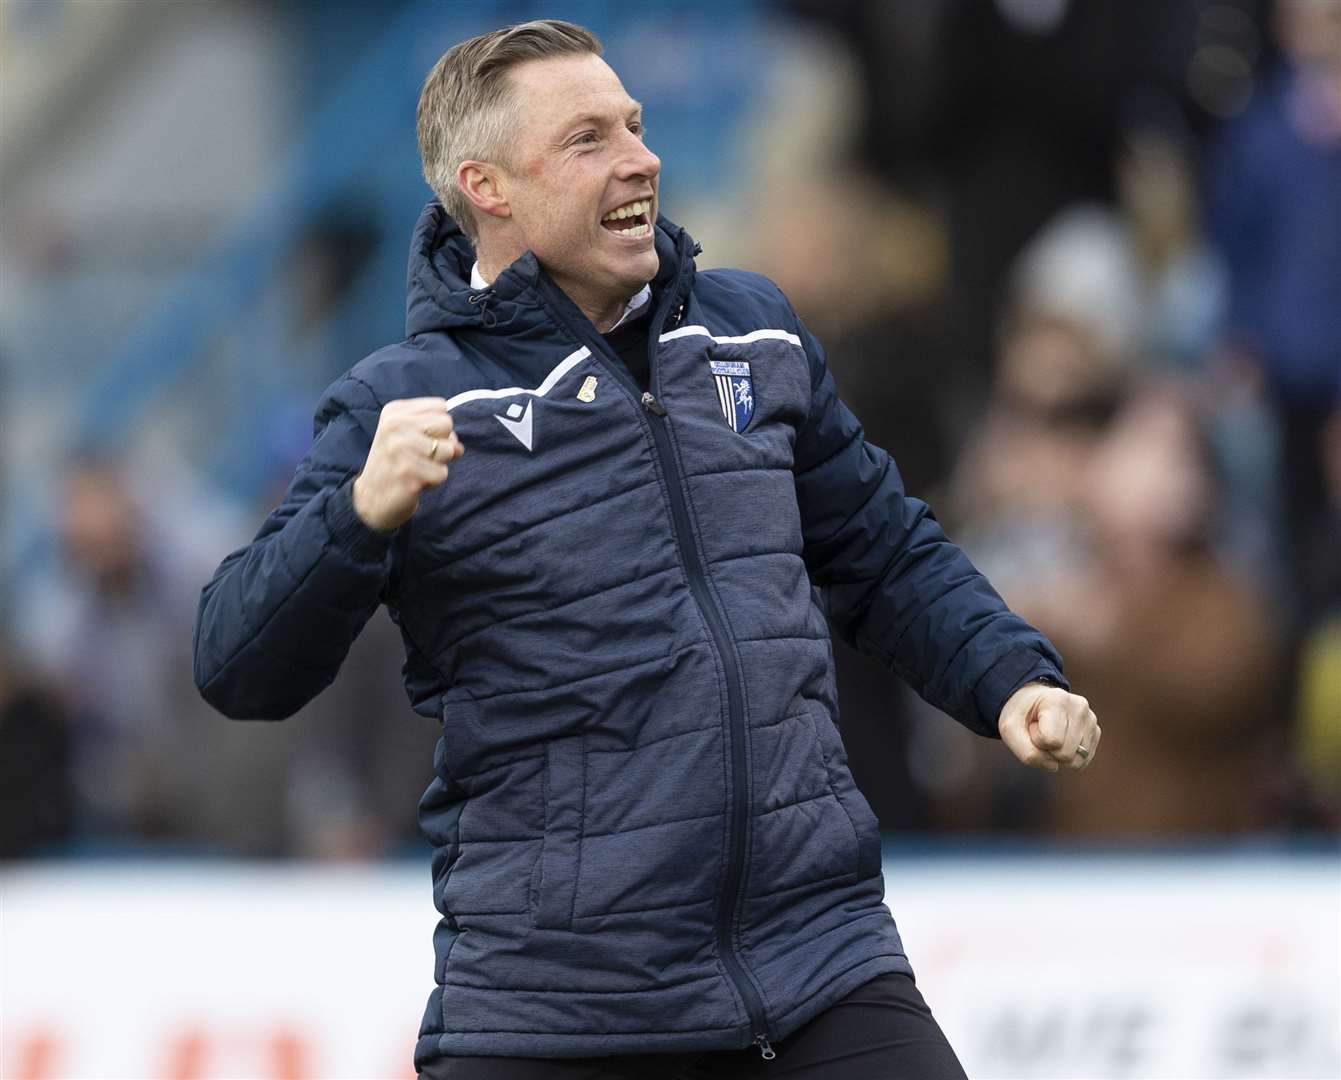 Gillingham boss Neil Harris has got plenty to smile about after a torrid start to the season